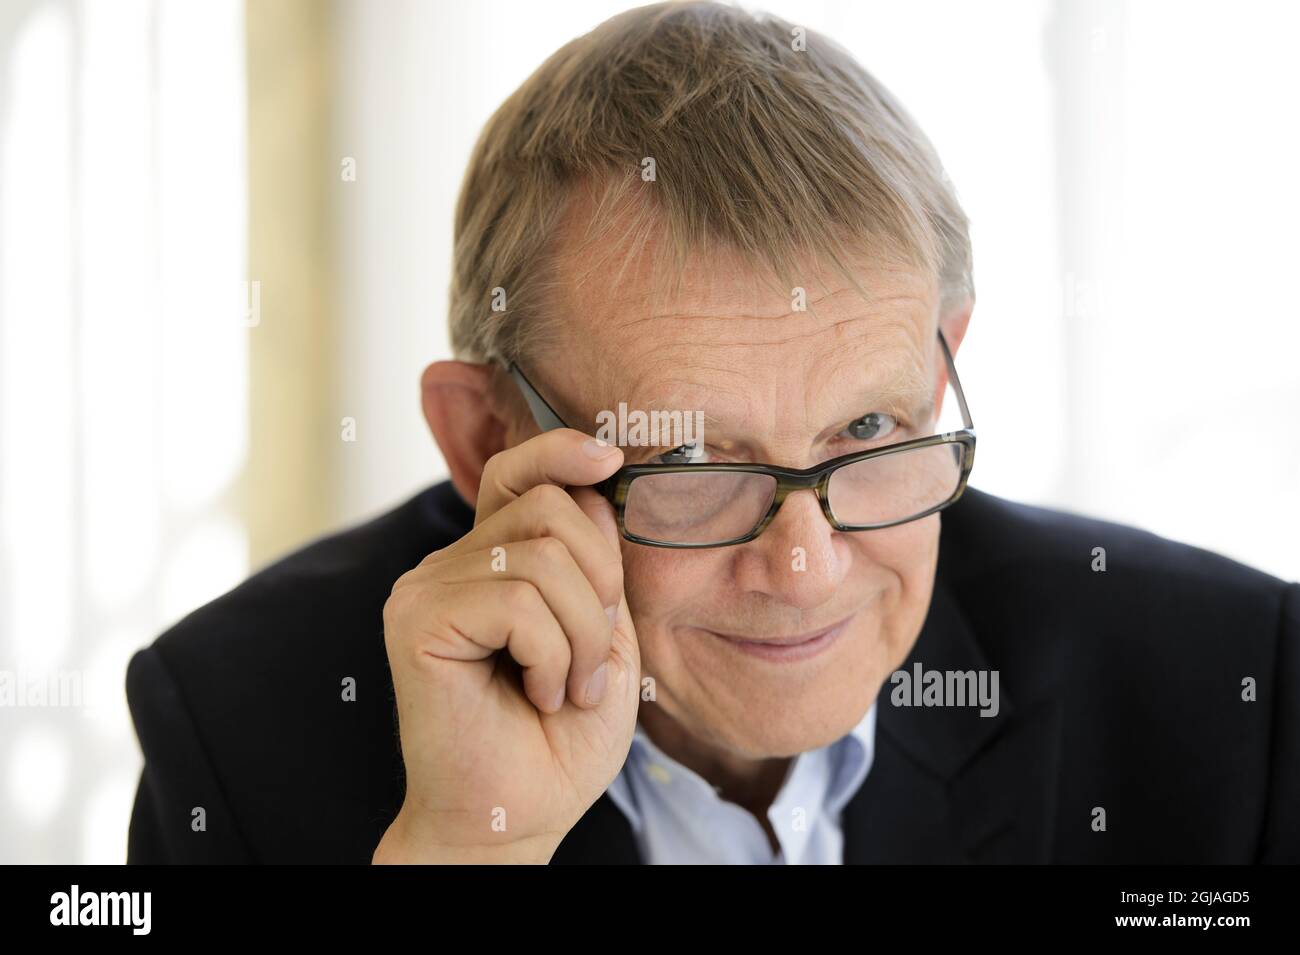 ** Swedish Professor Hans Rosling is dead at 68 ** STOCKHOLM 2015-09-07 Swedish Professor Hans Rosling attended a fund raising event for the UNHCR at the Operakallaren restaurant in Stockholm, Sweden, September 7, 2015 Rosling has gone viral with videos criticizing politicians and journalists on the current refugee situation. Foto: Henrik Montgomery / TT / kod 10060  Stock Photo